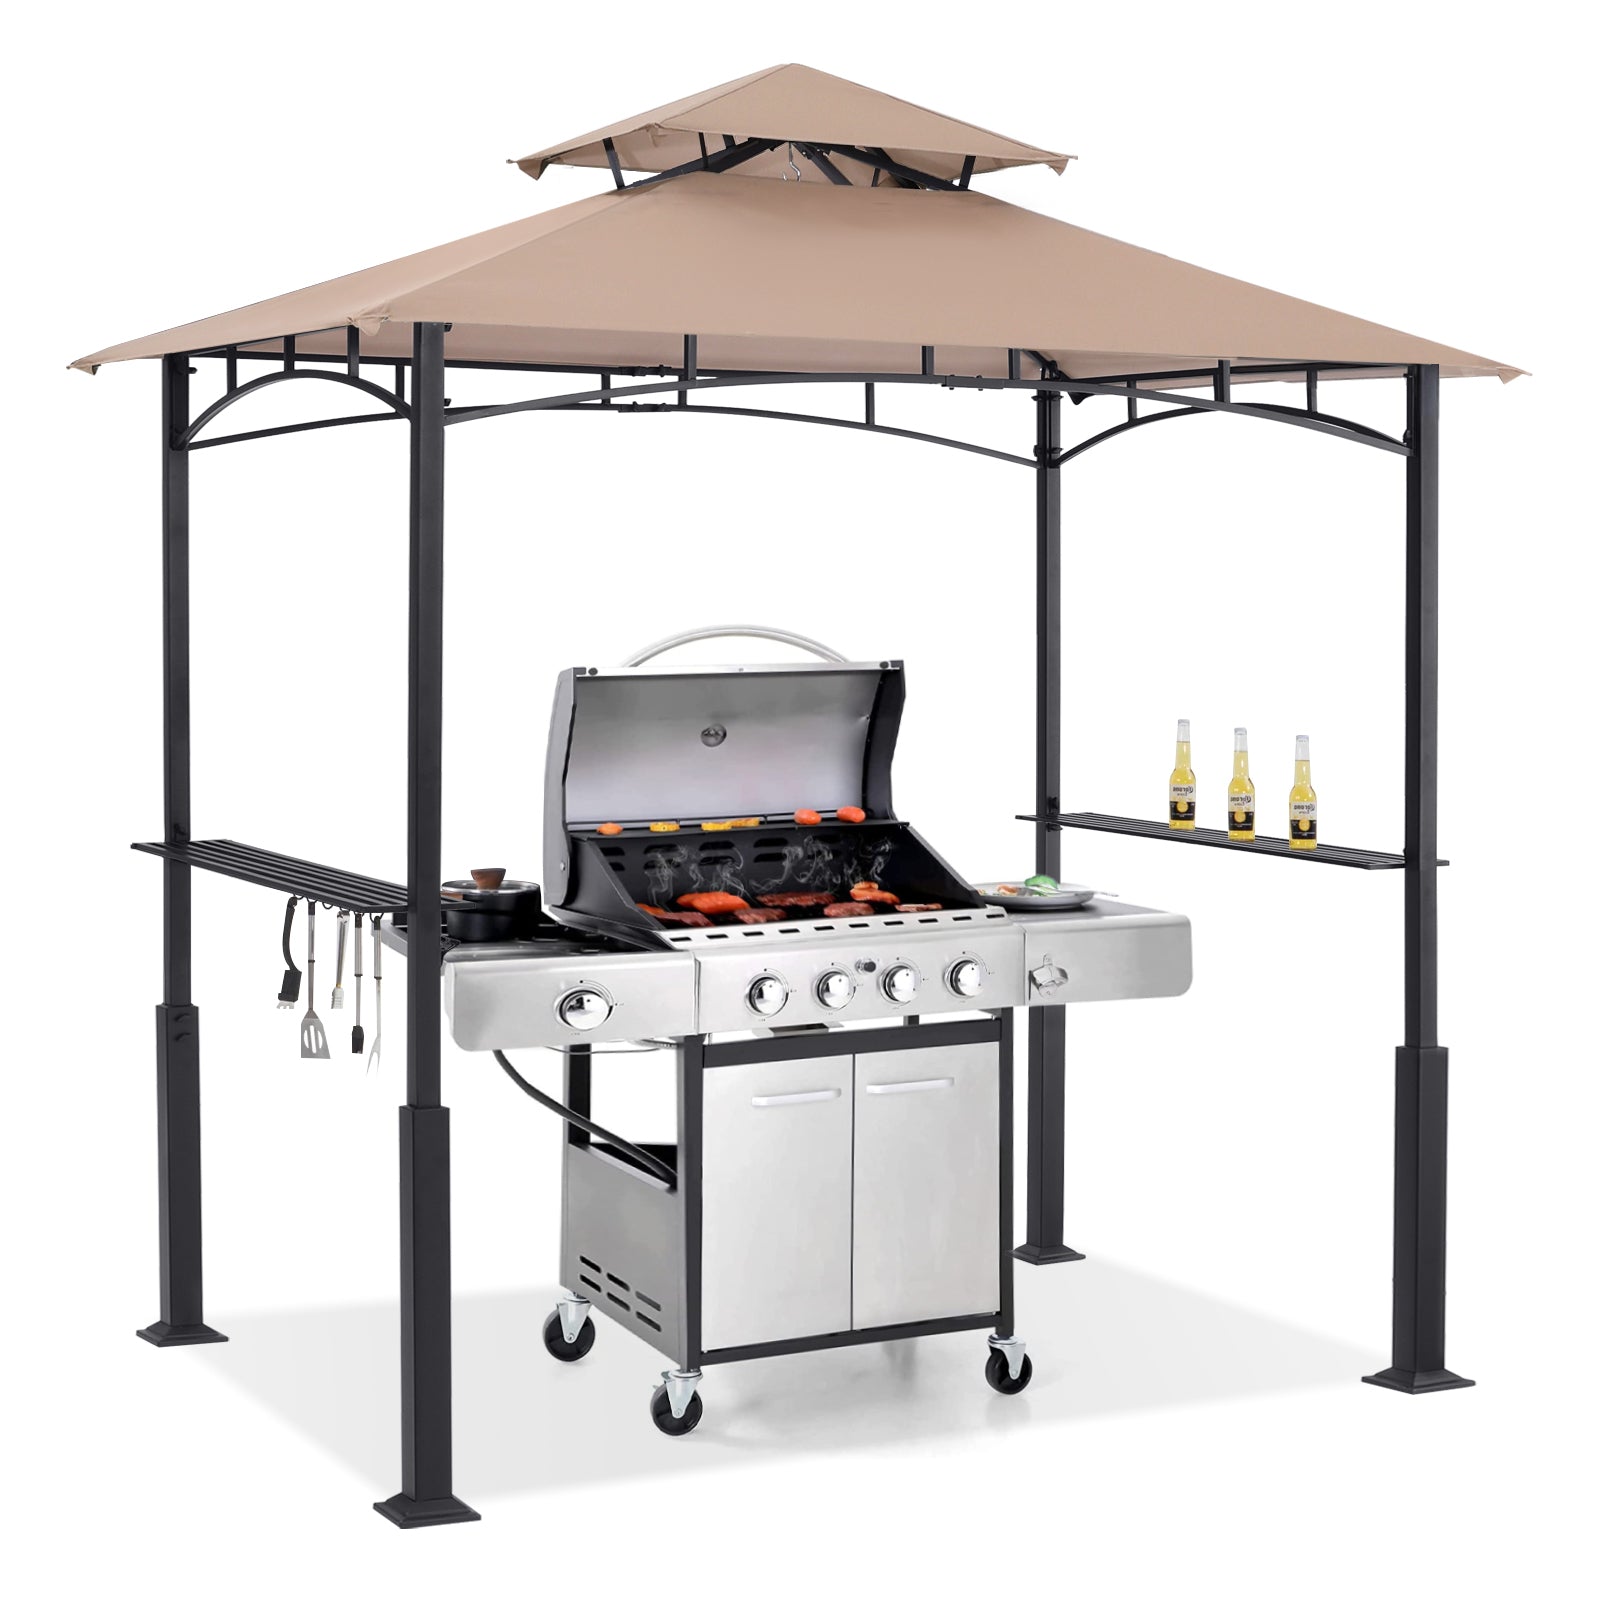 Outdoor 8x 5 Grill Gazebo Shelter for BBQ with LED Light